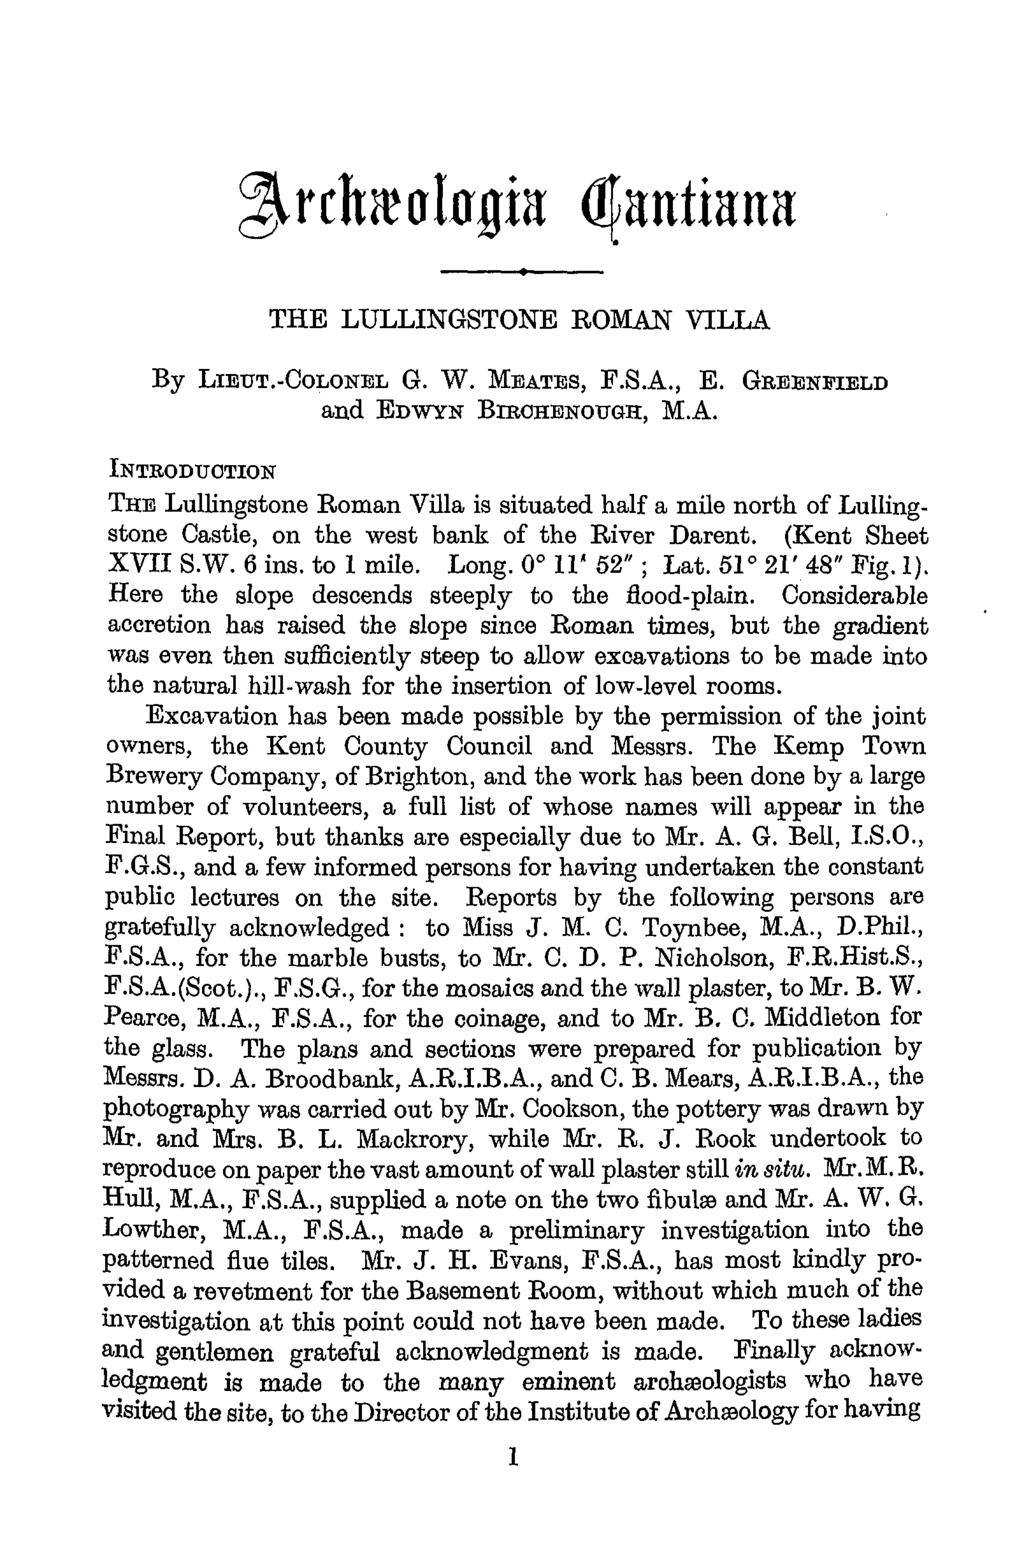 Archaeologia Cantiana Vol. 63 1950 THE LULLINGSTONE ROMAN VILLA By LIEUT.-COLONEL G. W. MEATES, F.S.A., E. GBEENJIELD and EDWYN BIROHENOITGH, M.A. INTRODUCTION THE Lullingstone Roman Villa is situated half a mile north of Lullingstone Castle, on the west bank of the River Darent.